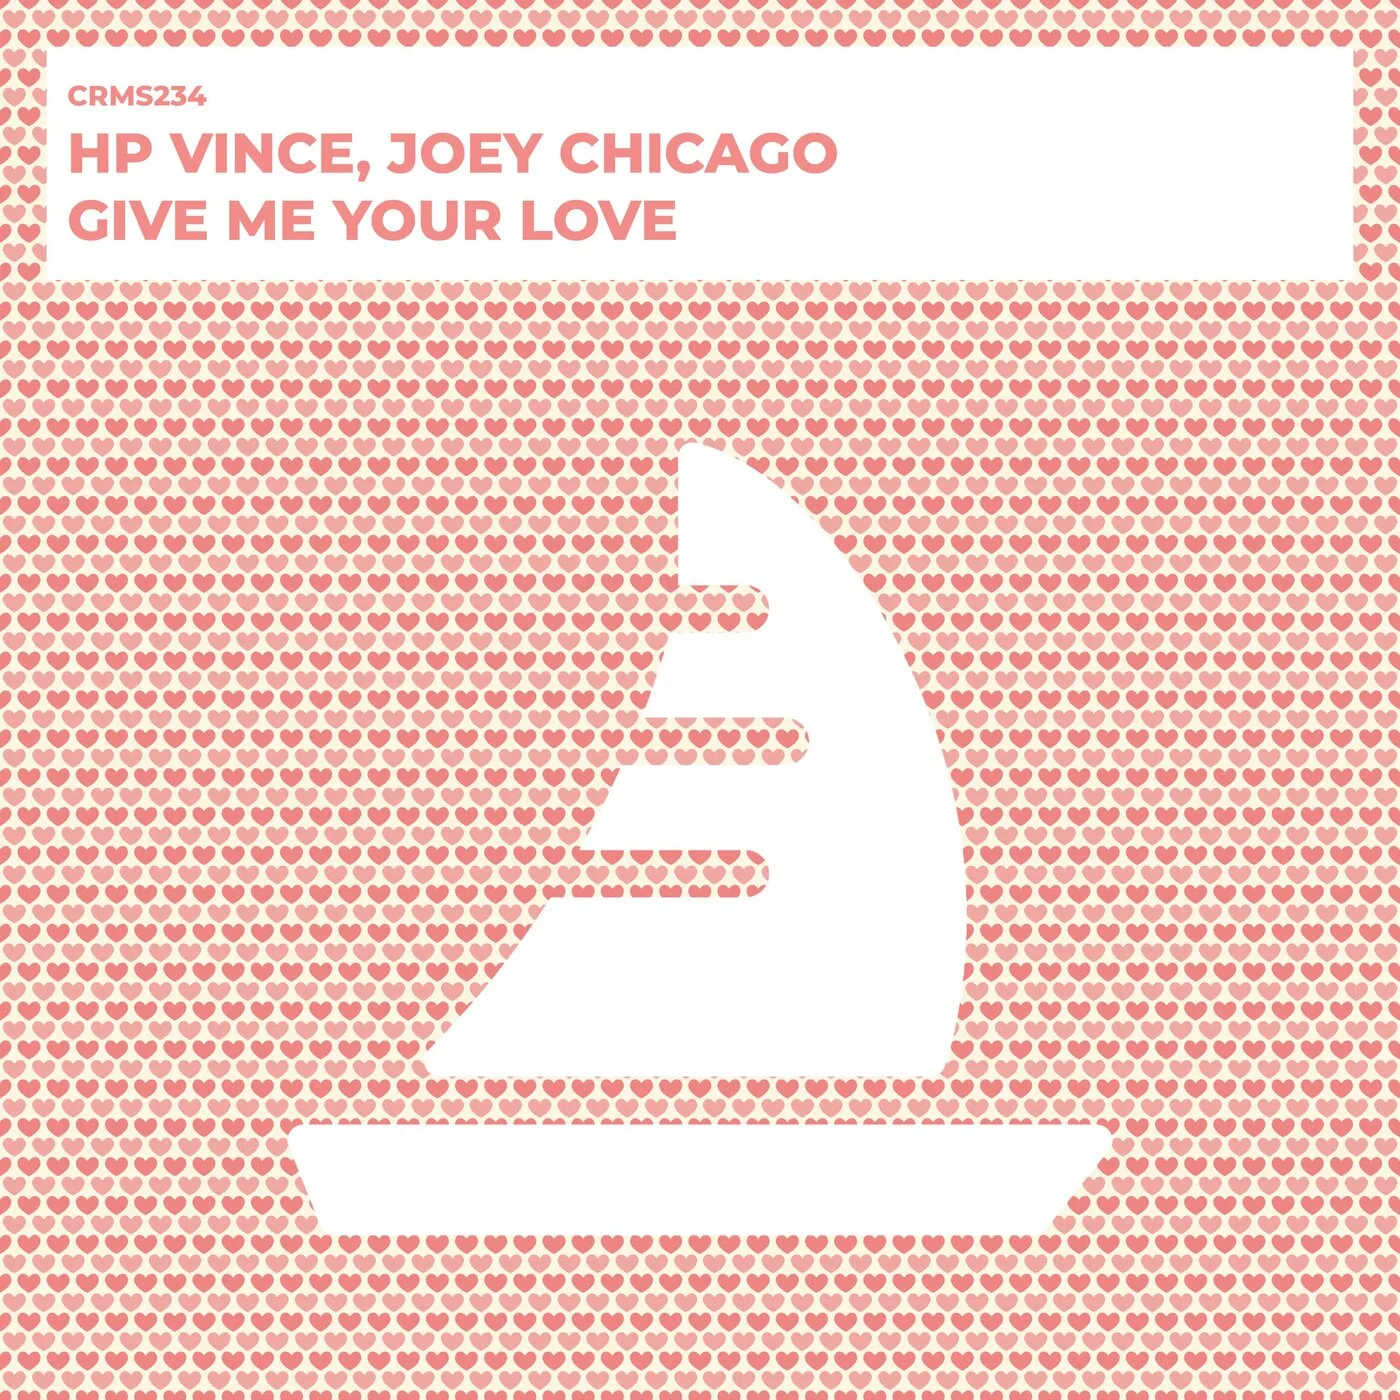 Hp Vince Joey Chicago - Give Me Your Love (Original Mix)